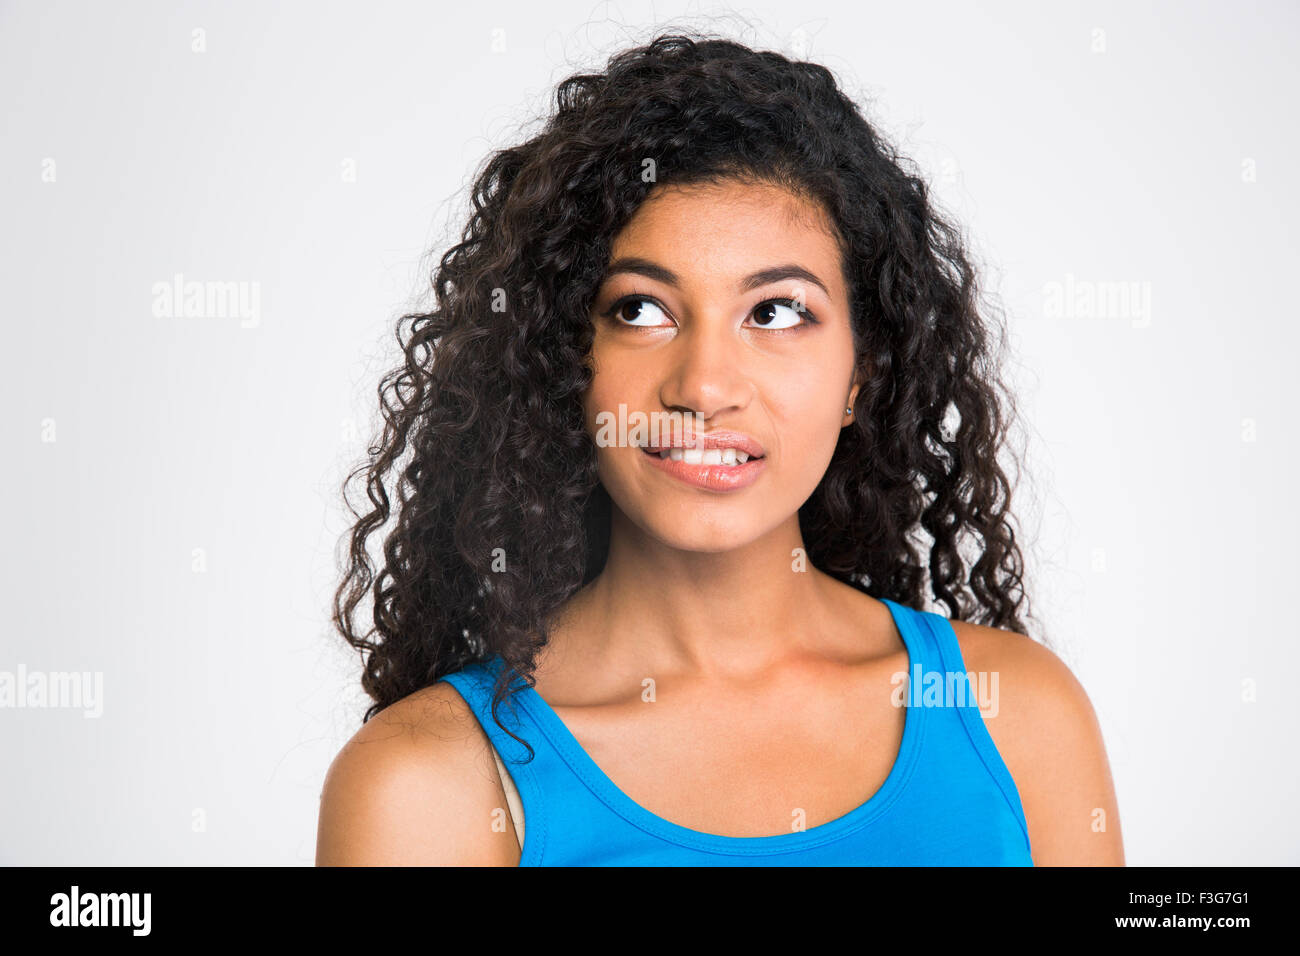 Portrait of a thoughtful afro american woman biting her lips and looking up at copyspace isolated on a white background Stock Photo